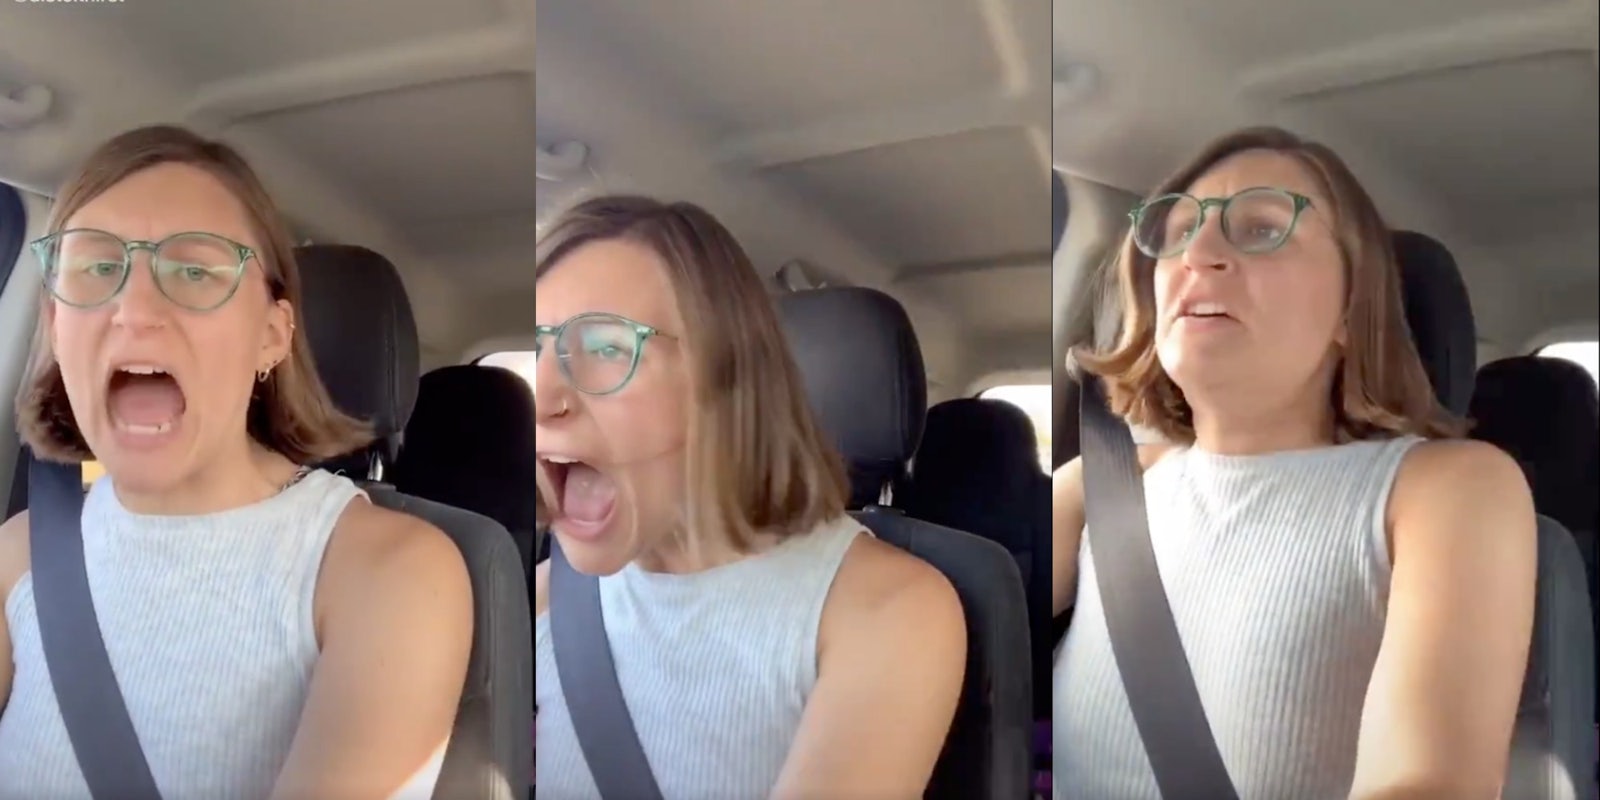 A woman freaking out over RBG's death